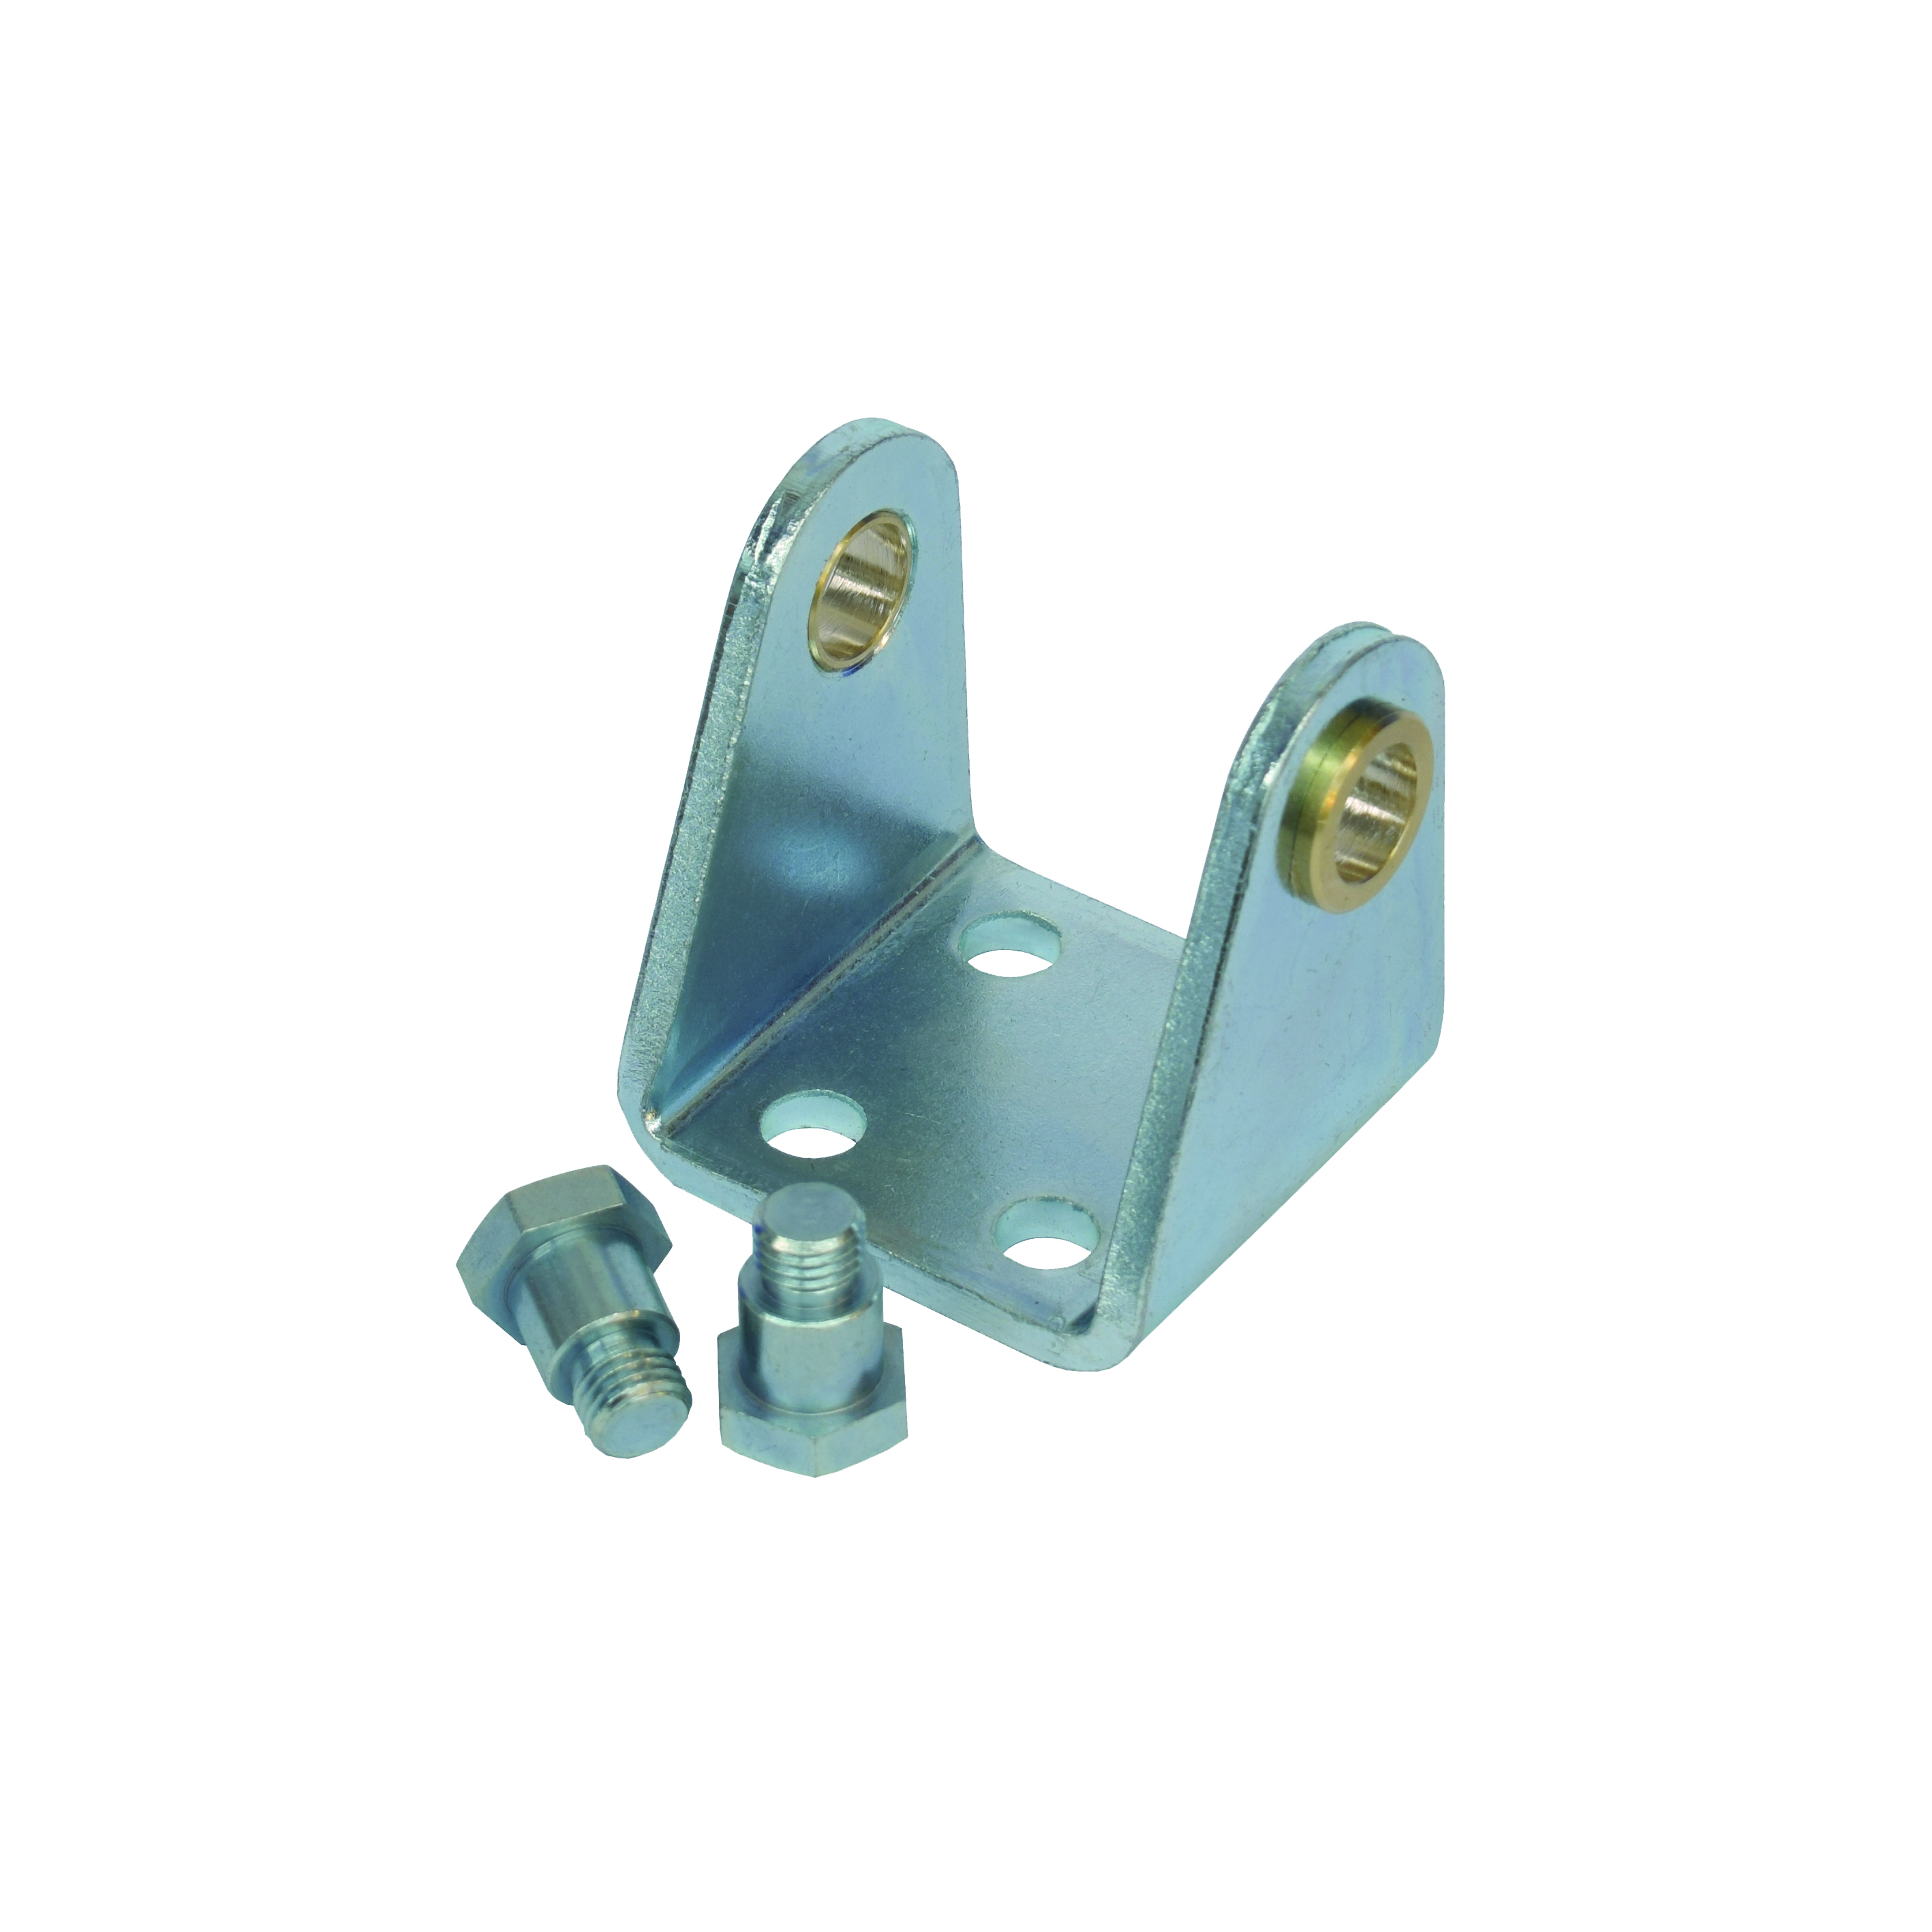 Rear hinges for round profile pneumatic cylinders series P P - Round profile pneumatic cylinders